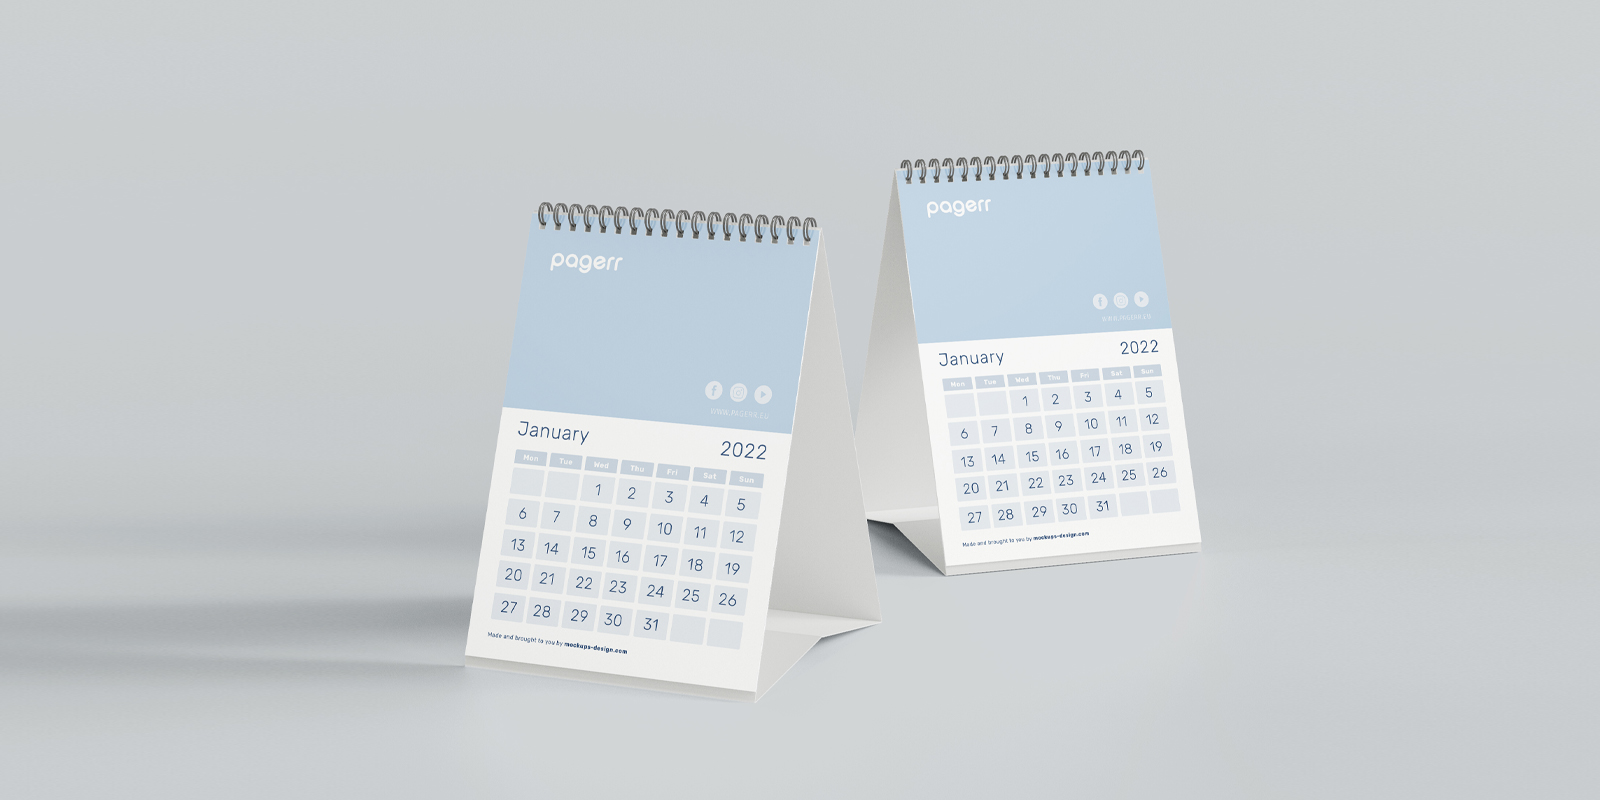 Desk calendars in Madrid - Print with Pagerr